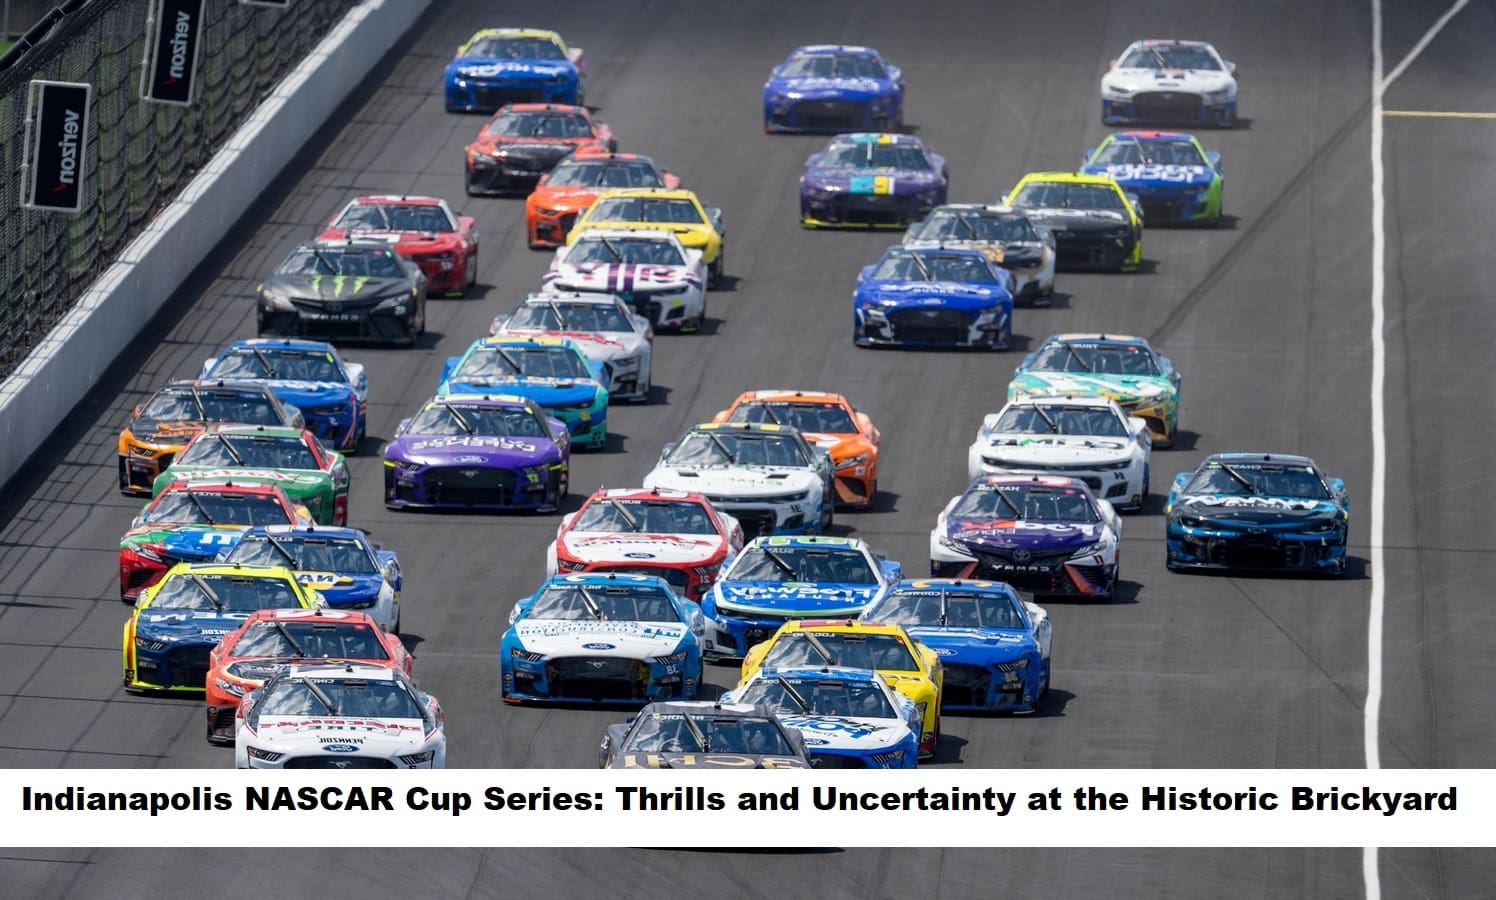 indianapolis-nascar-cup-series-thrills-and-uncertainty-at-the-historic-brickyard